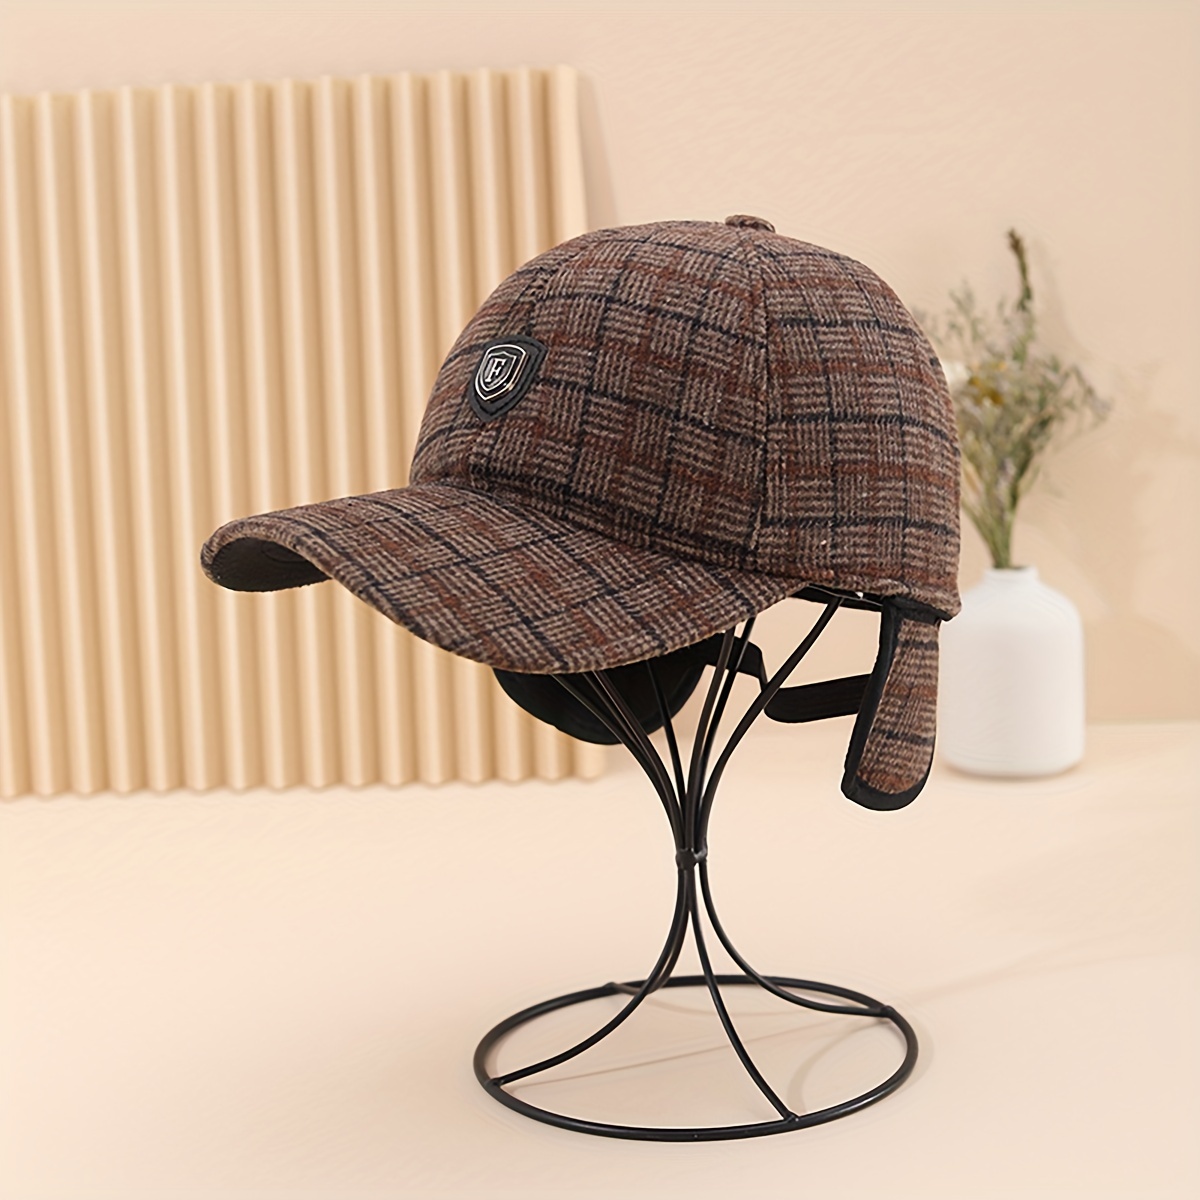 Sun Hats Ear Protection Warmth Peaked Cap Knitted Hat Old Man Hat